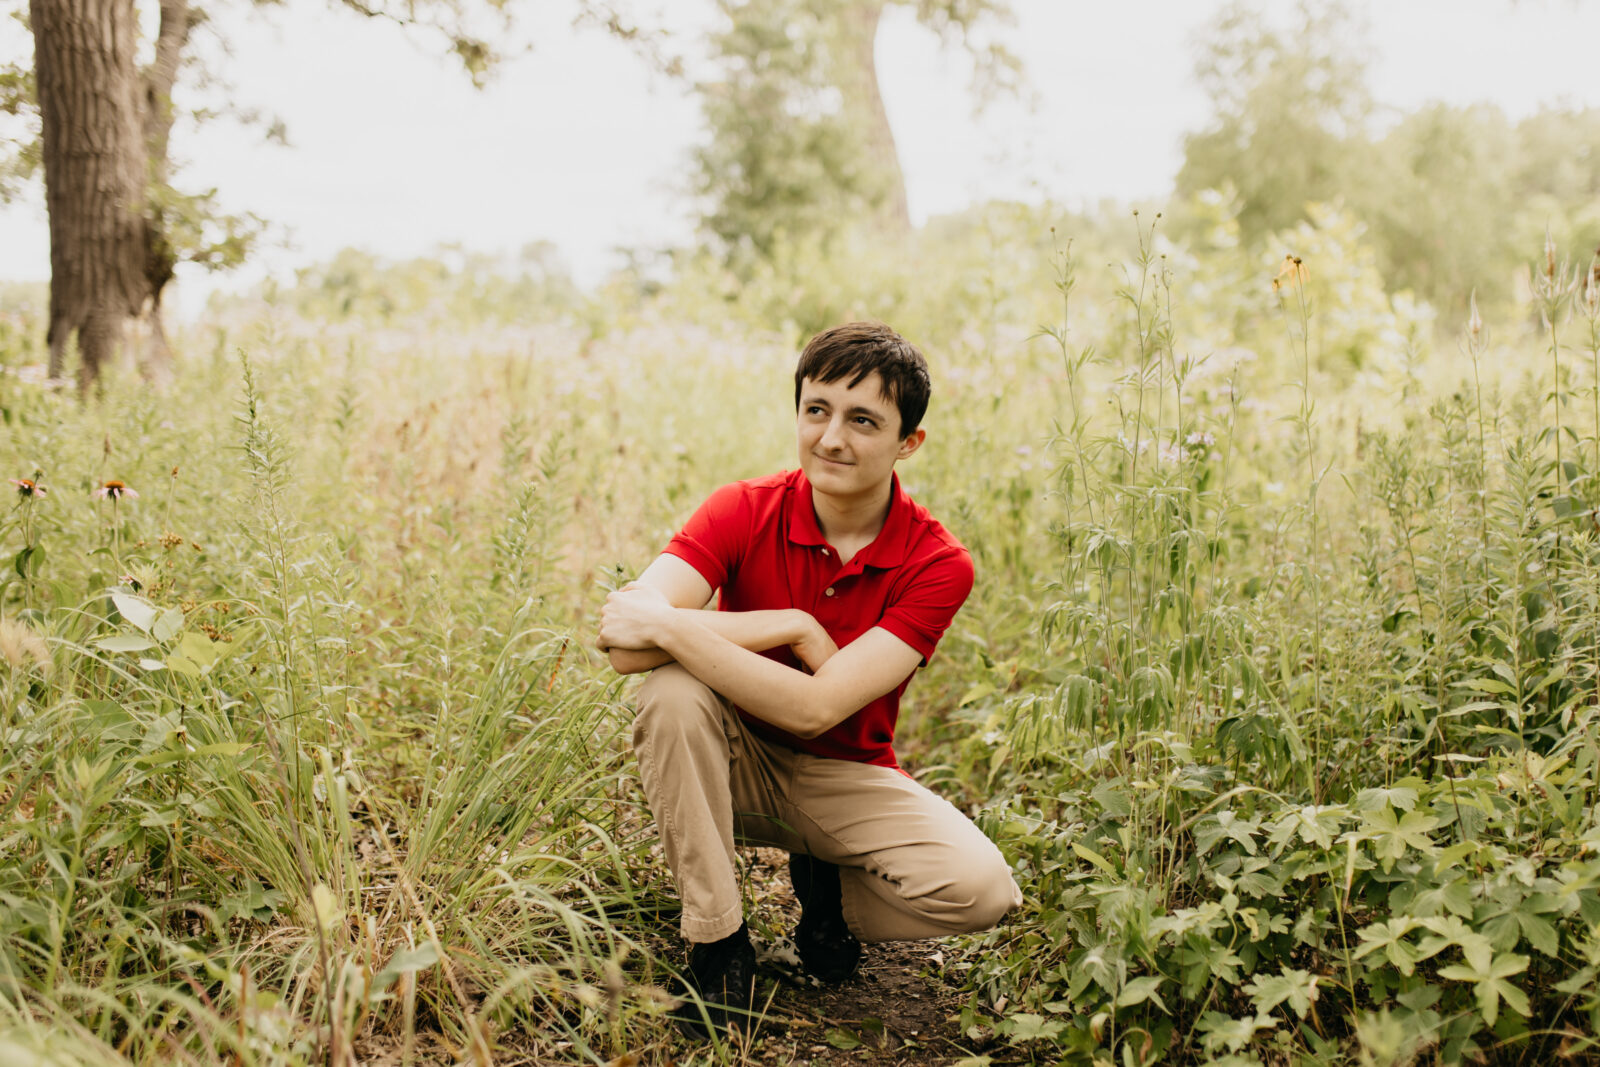 Sam, one of the 2024 Edina Seniors, had his senior session at the forest and field location.